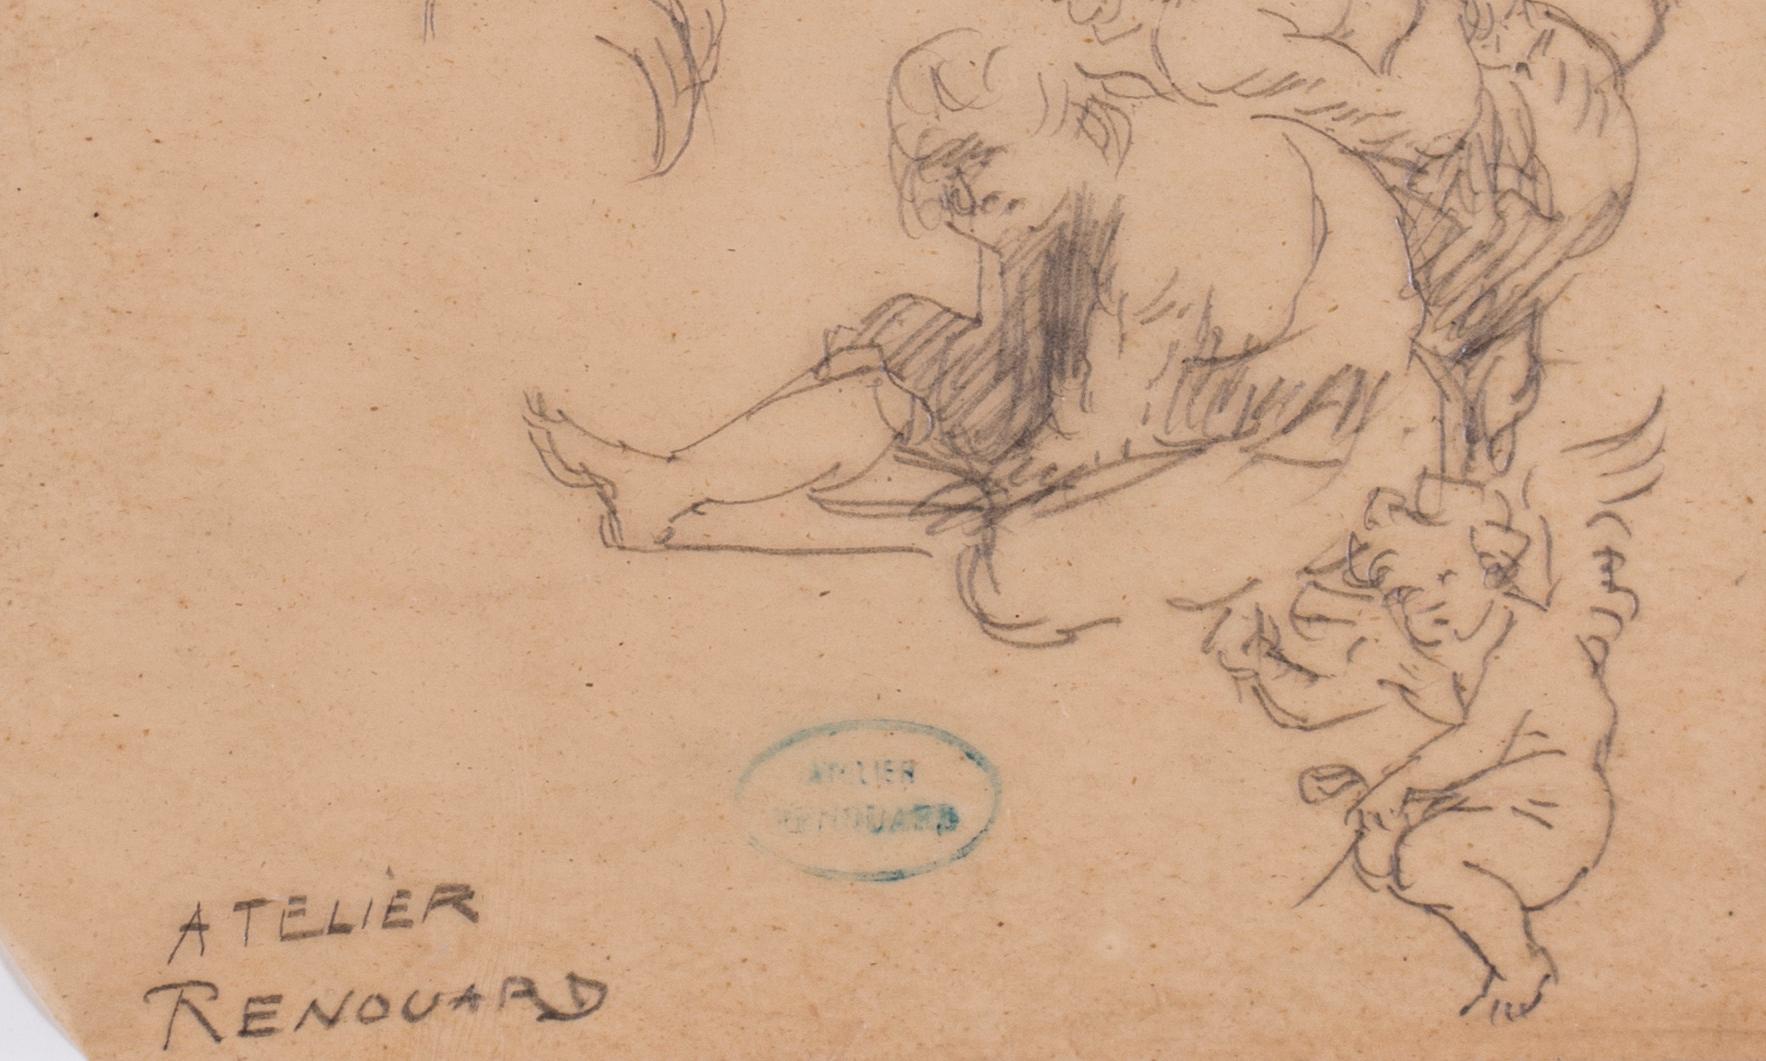 A study of desporting cherubs and a cavalier - Beige Figurative Art by Charles Paul Renouard